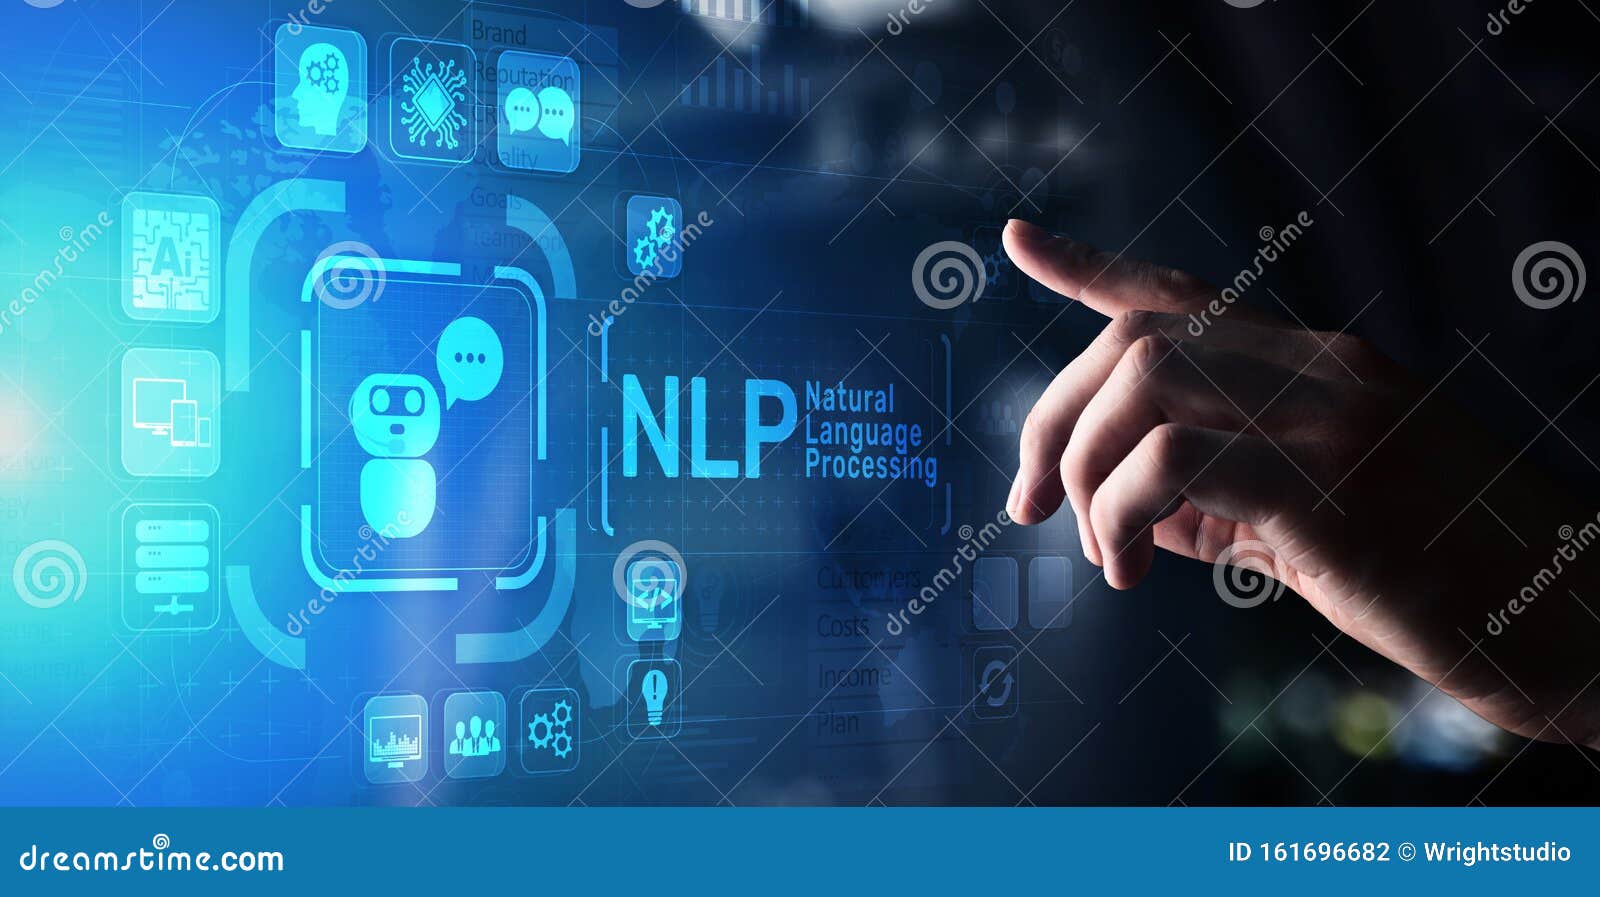 nlp natural language processing cognitive computing technology concept on virtual screen.